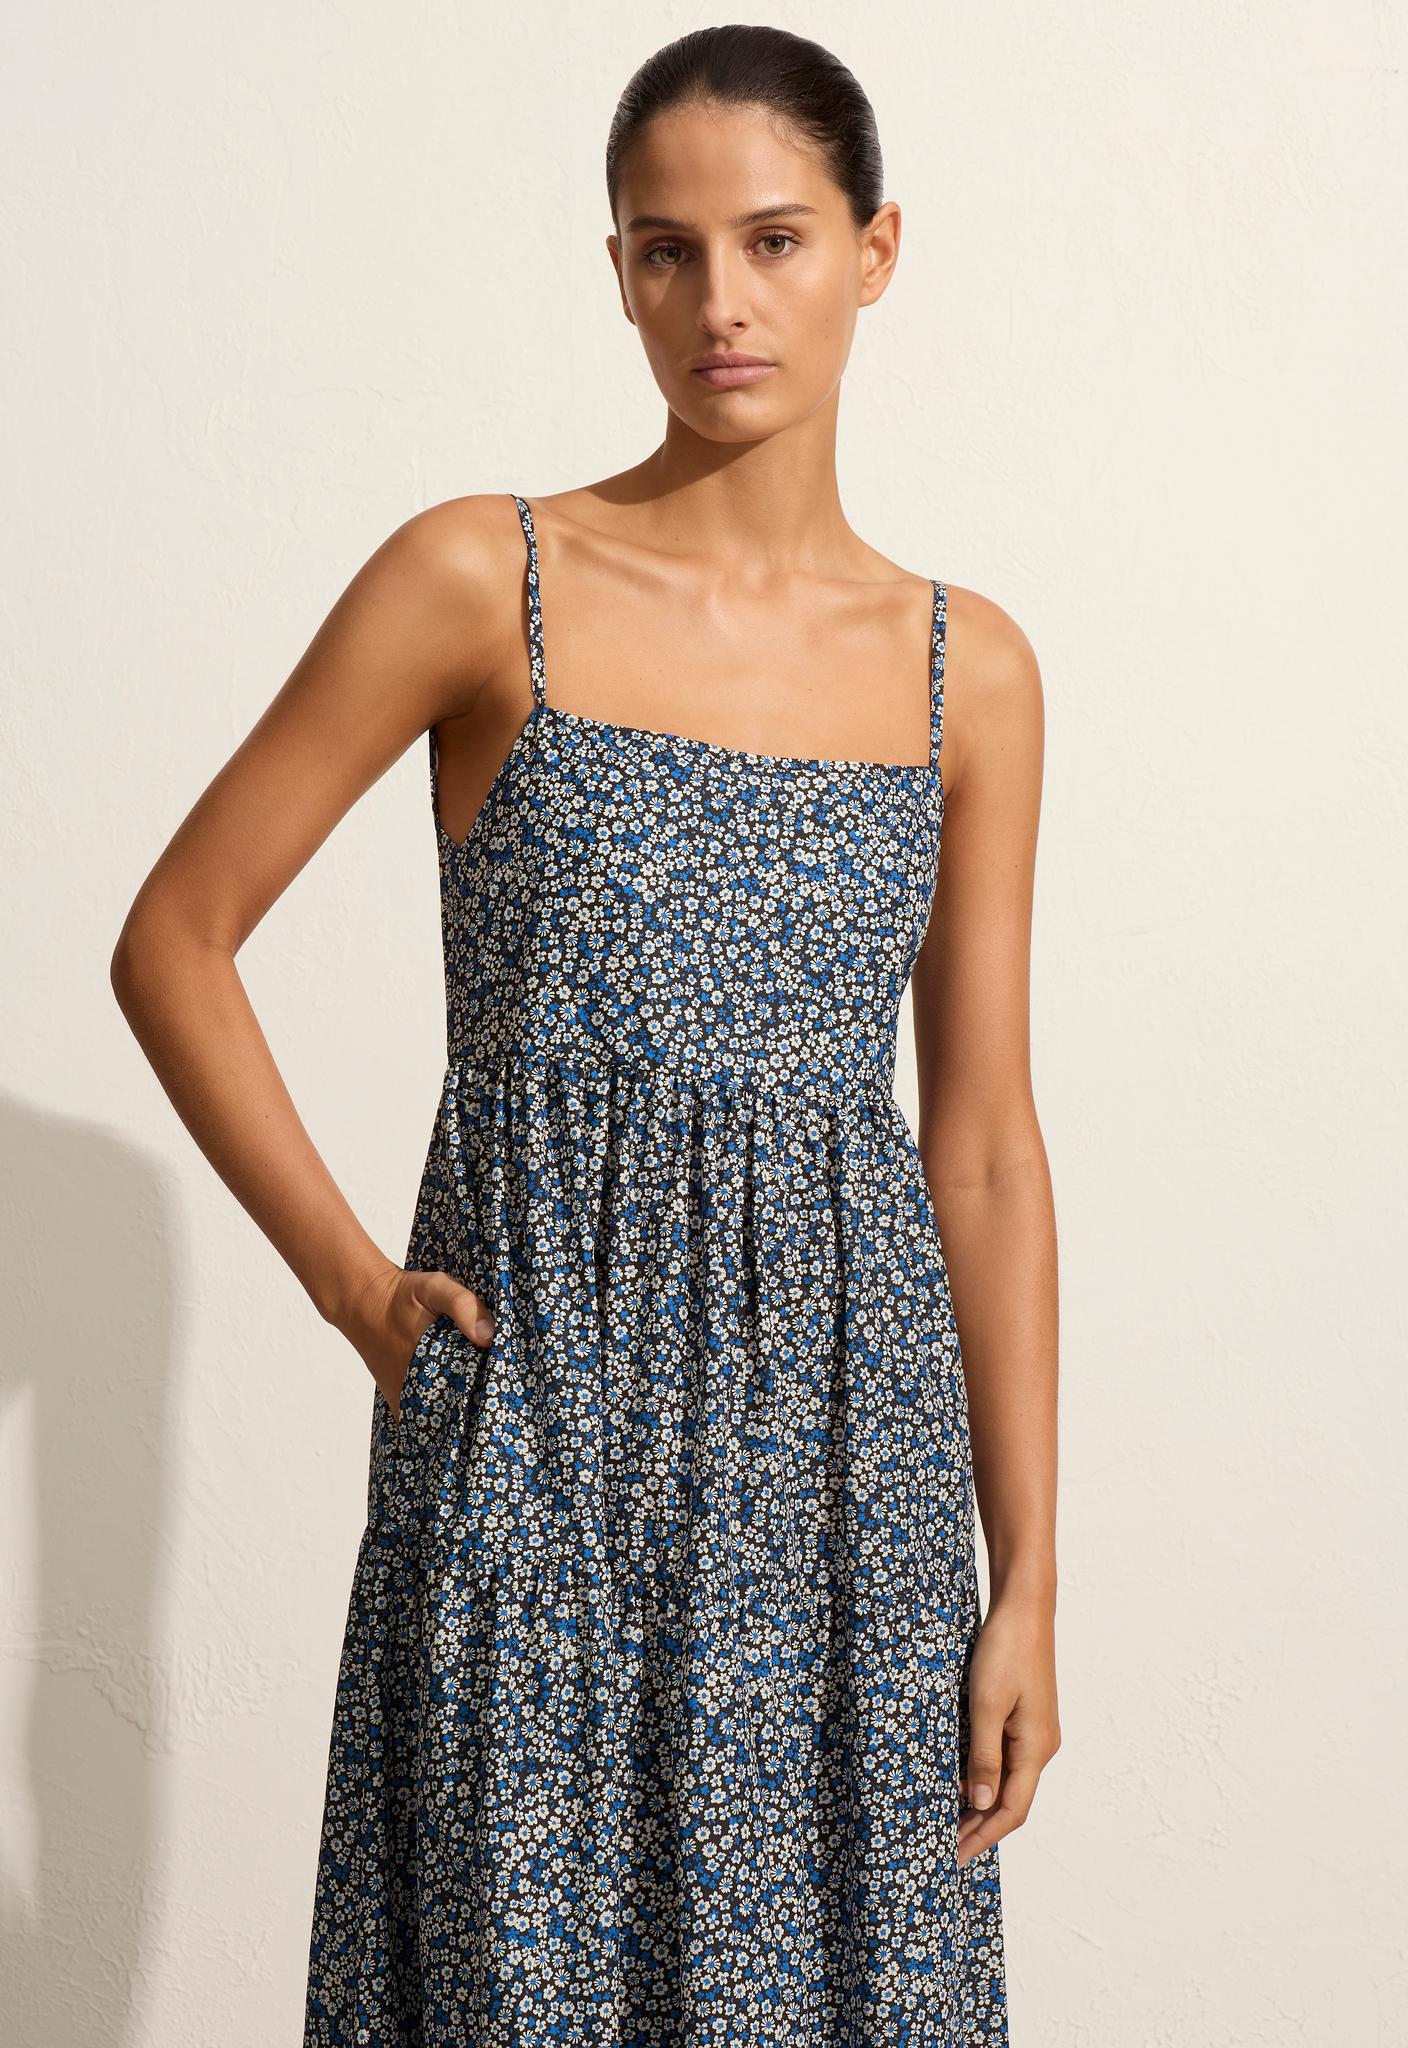 Tiered Low Back Sundress - Forget-Me-Not - Matteau